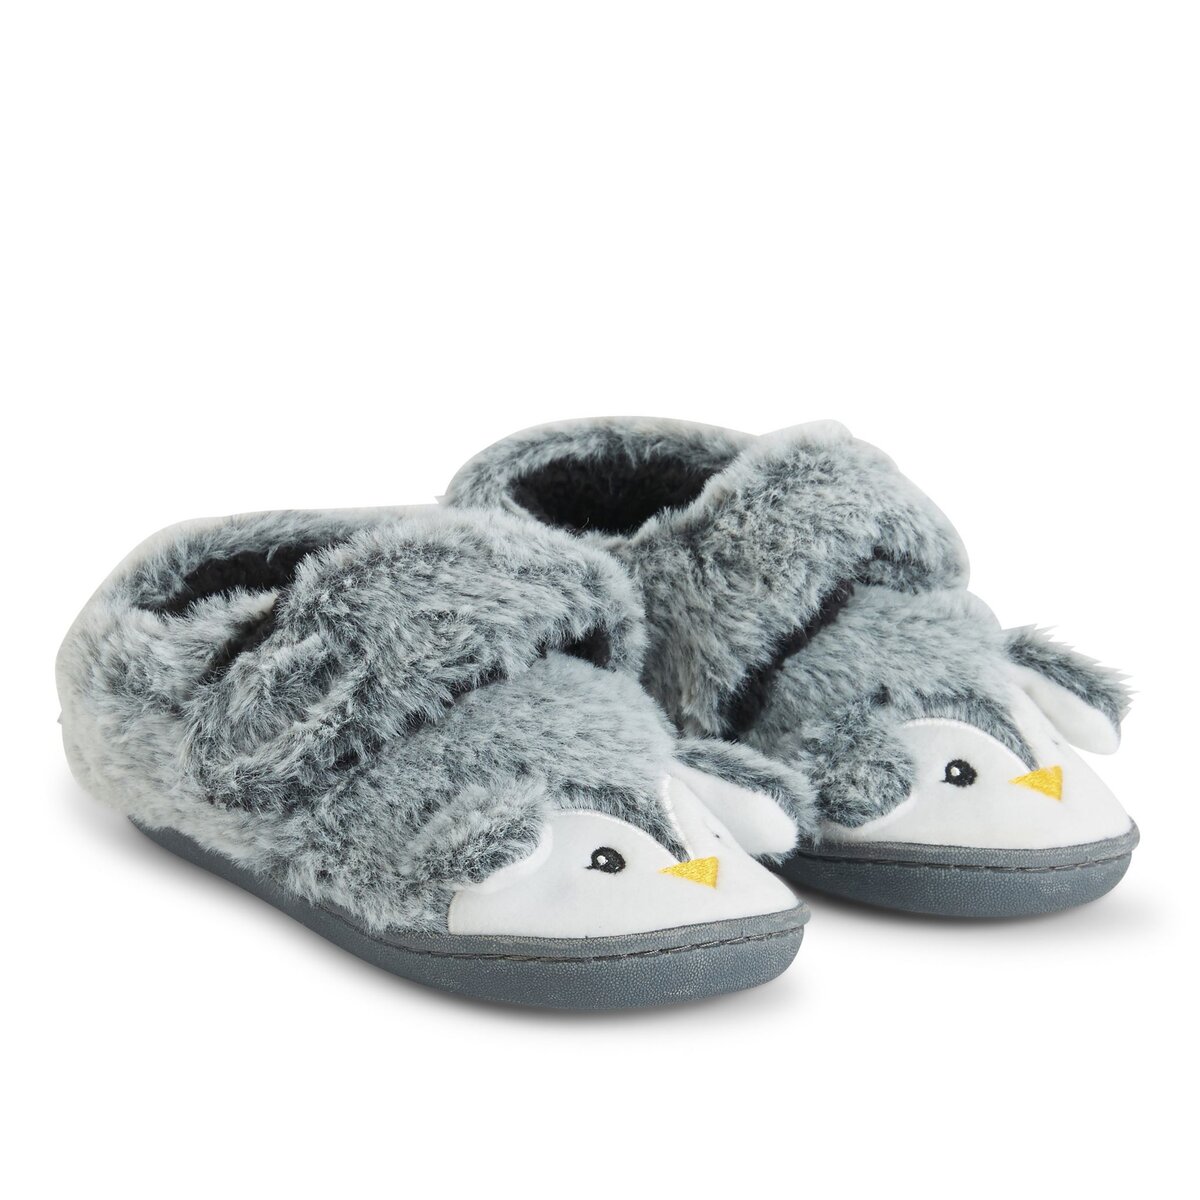 INEXTENSO Chaussons pingouins enfant